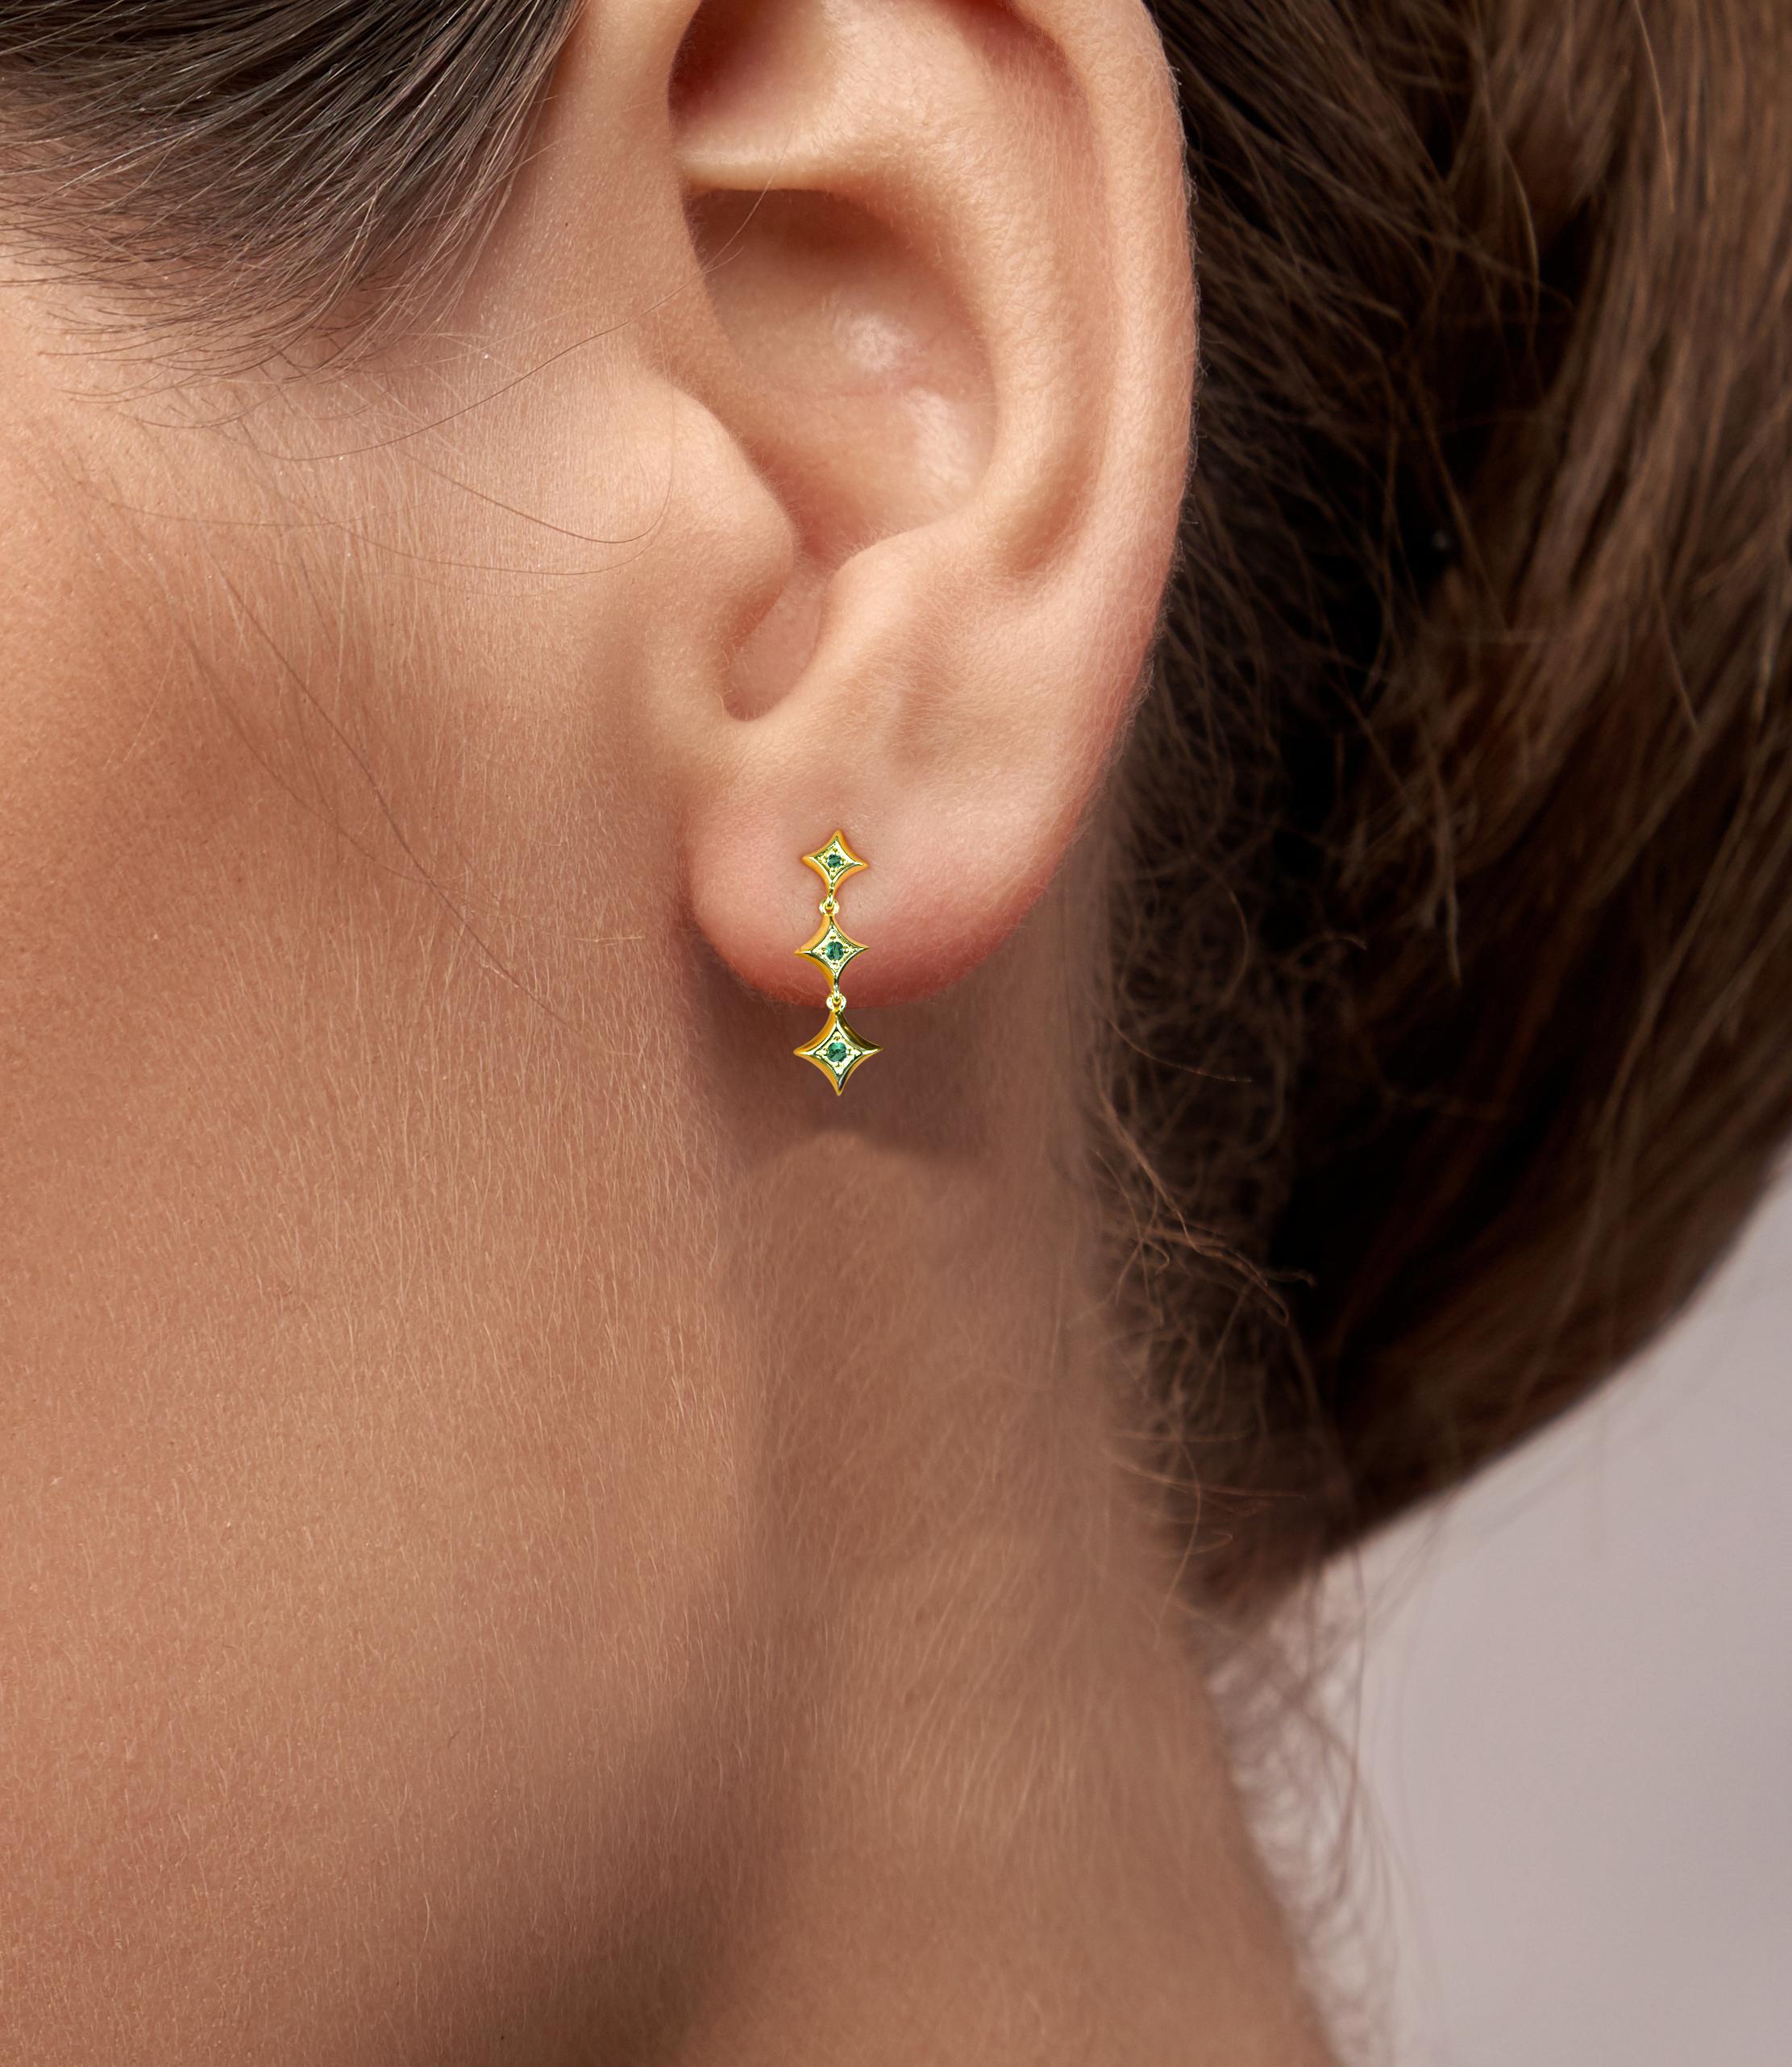 0.15ct Emerald, Ruby and Sapphire Studs Star Earrings in 14k Gold For Sale 2